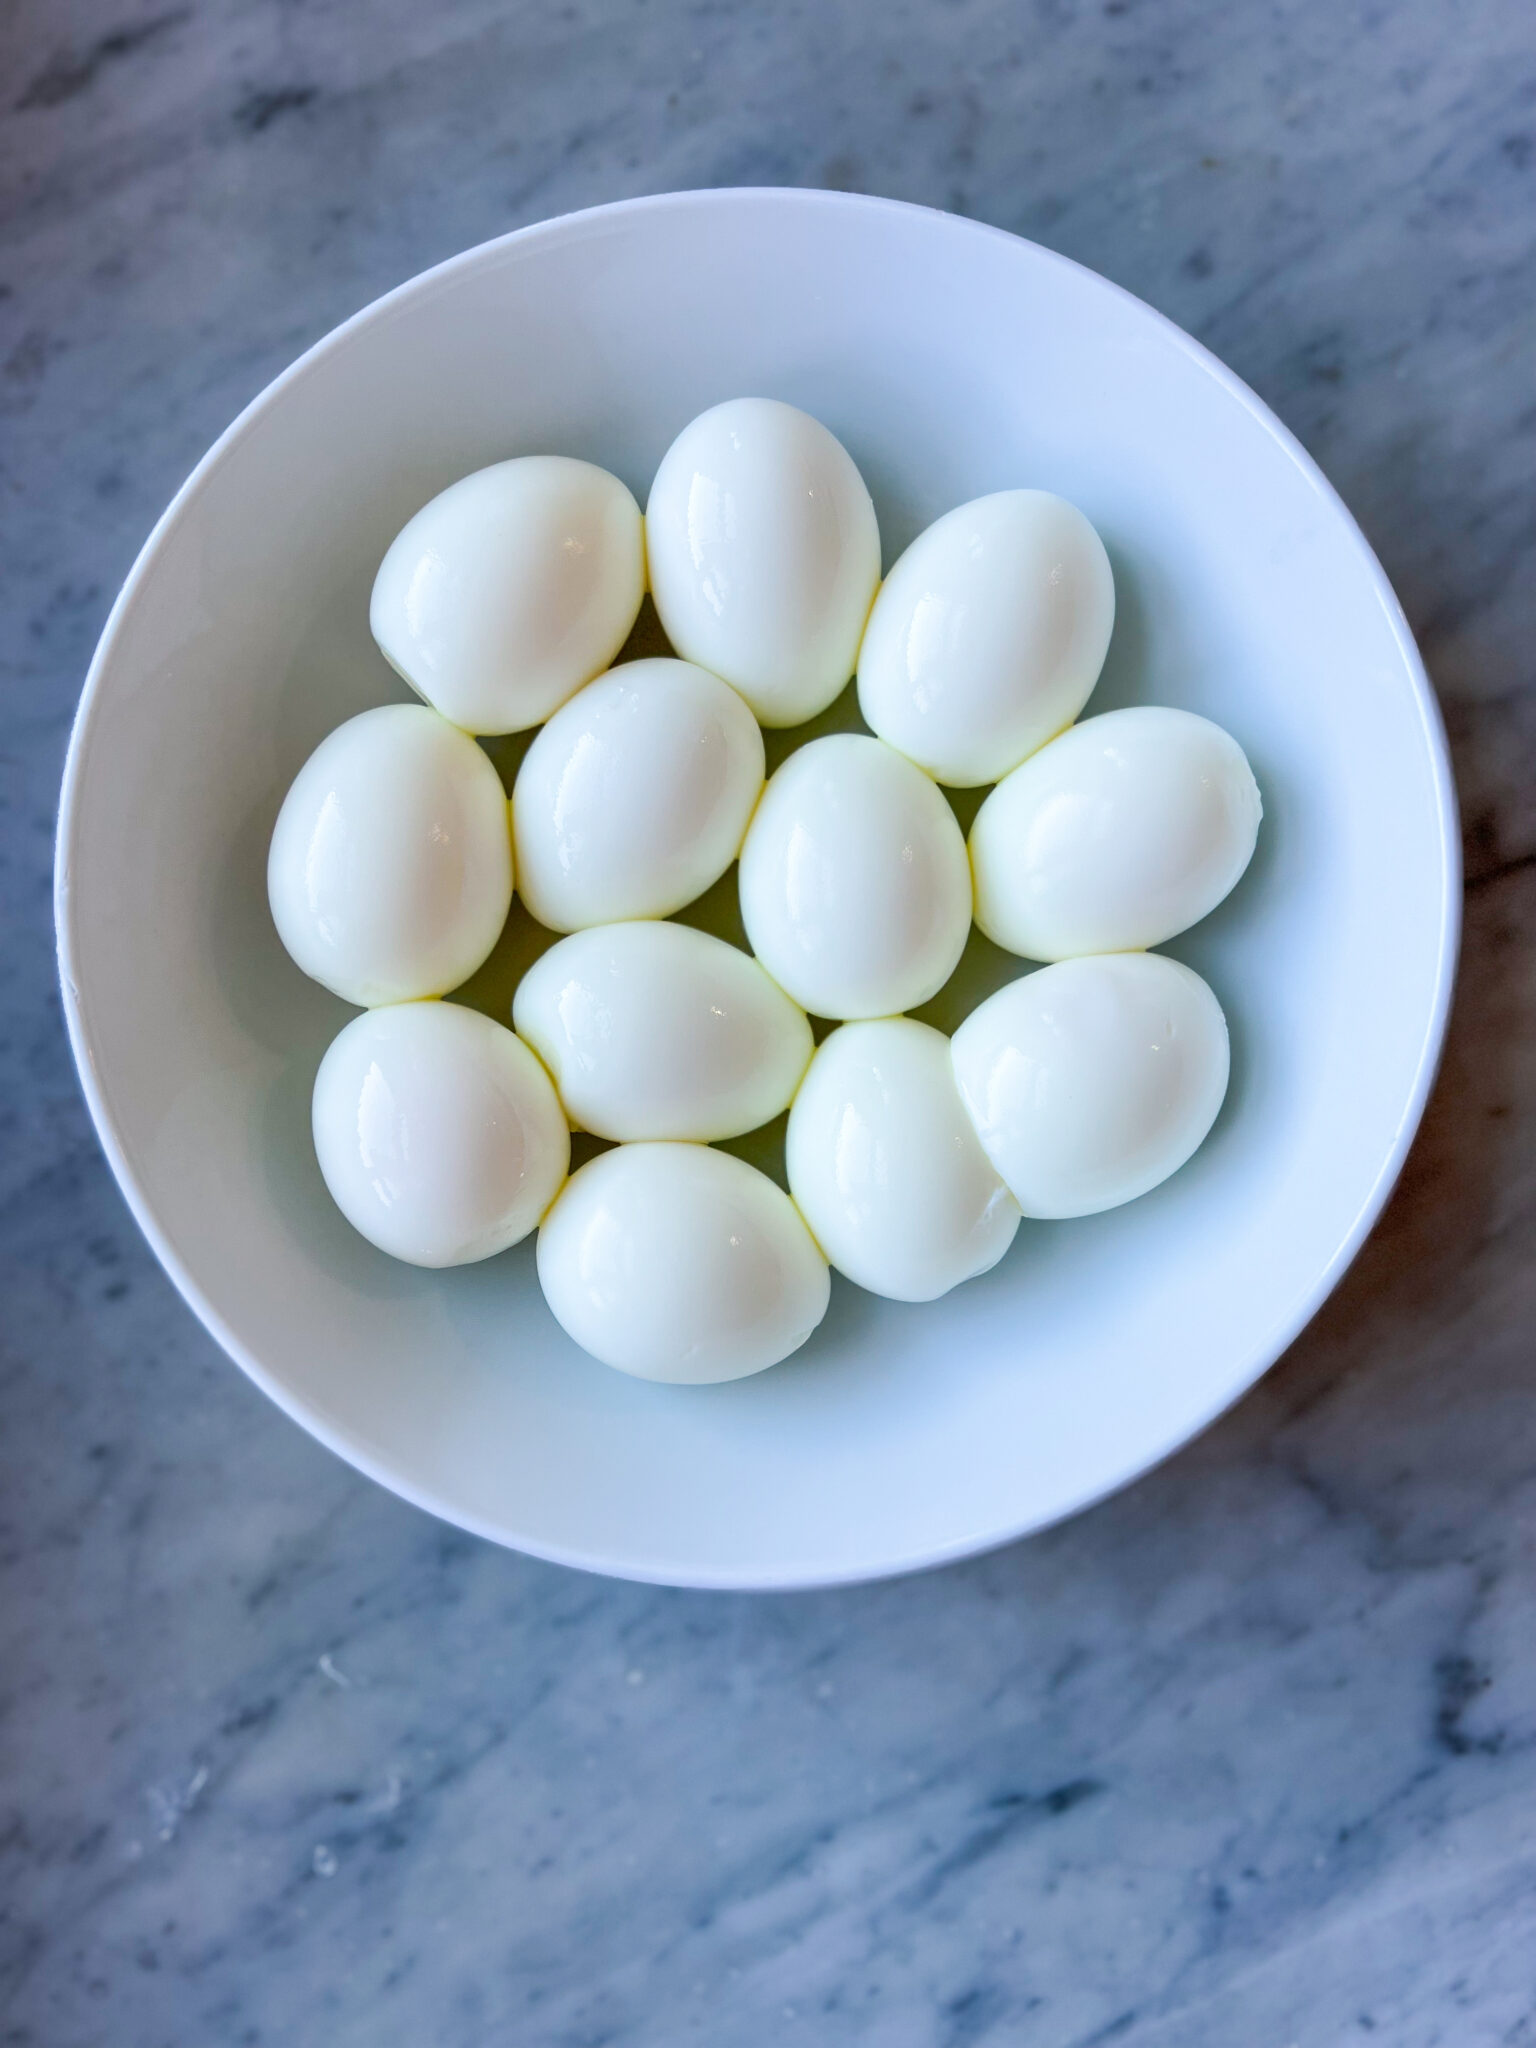 a dozen hard boiled eggs in a white bowl on a marble table